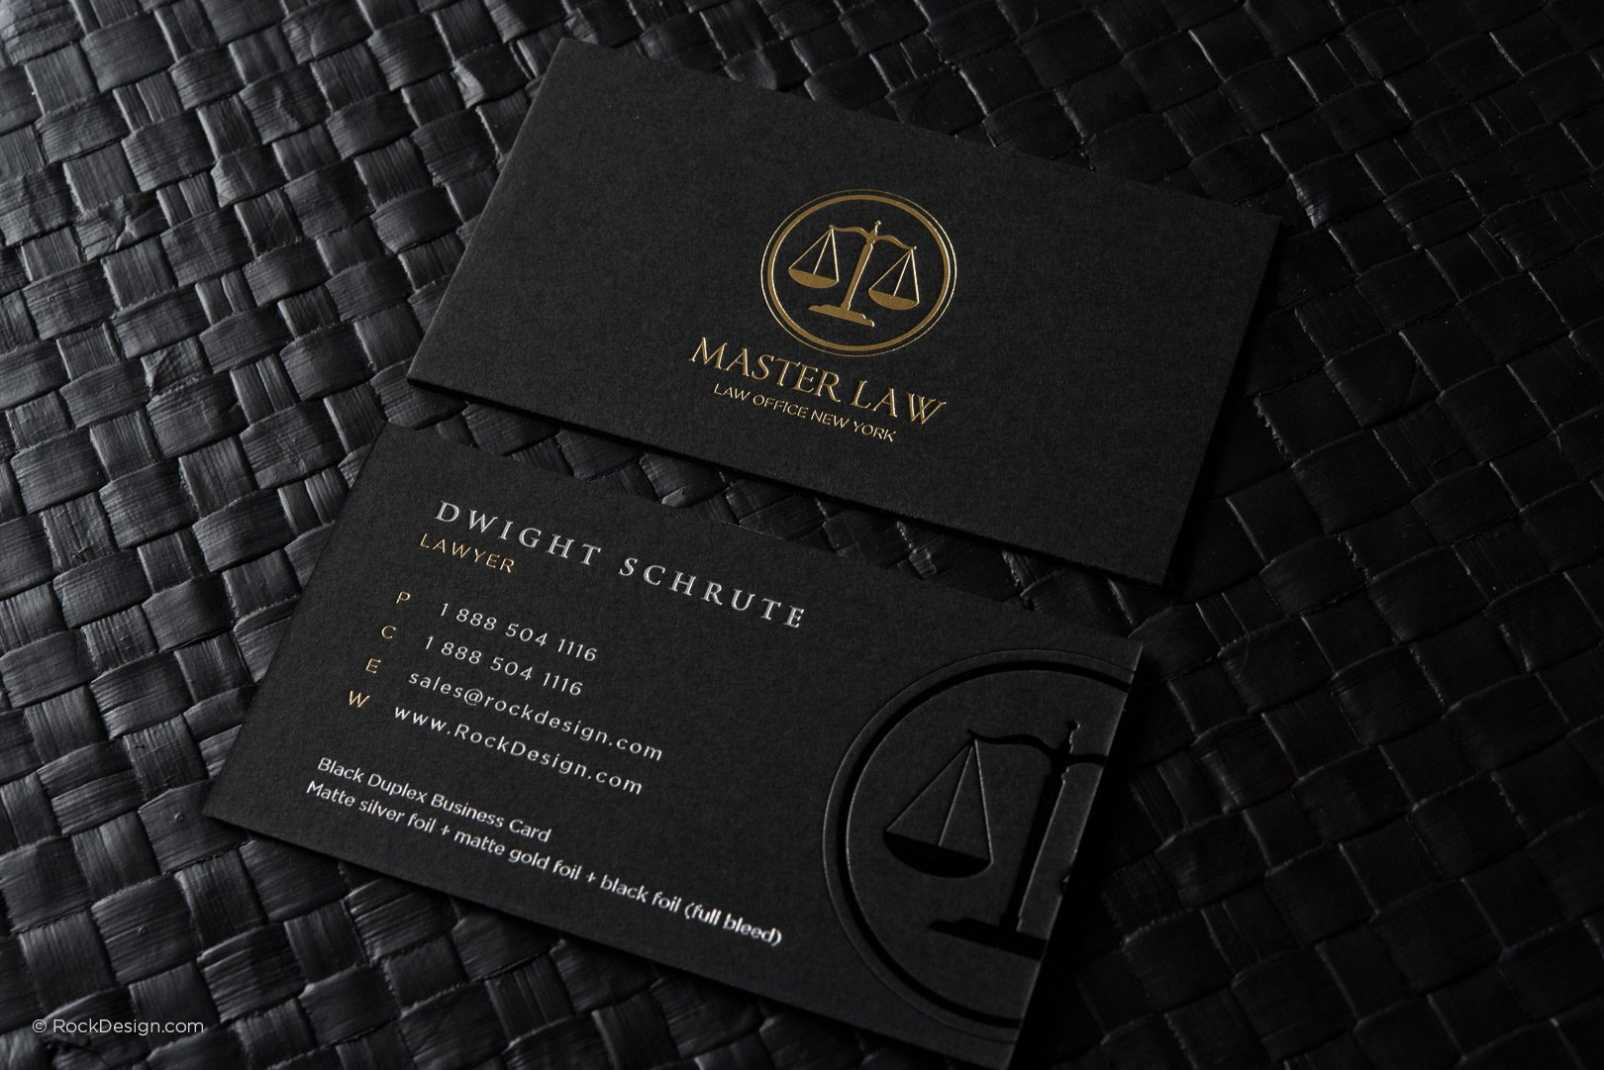 Free Lawyer Business Card Template | Rockdesign inside Legal Business Cards Templates Free